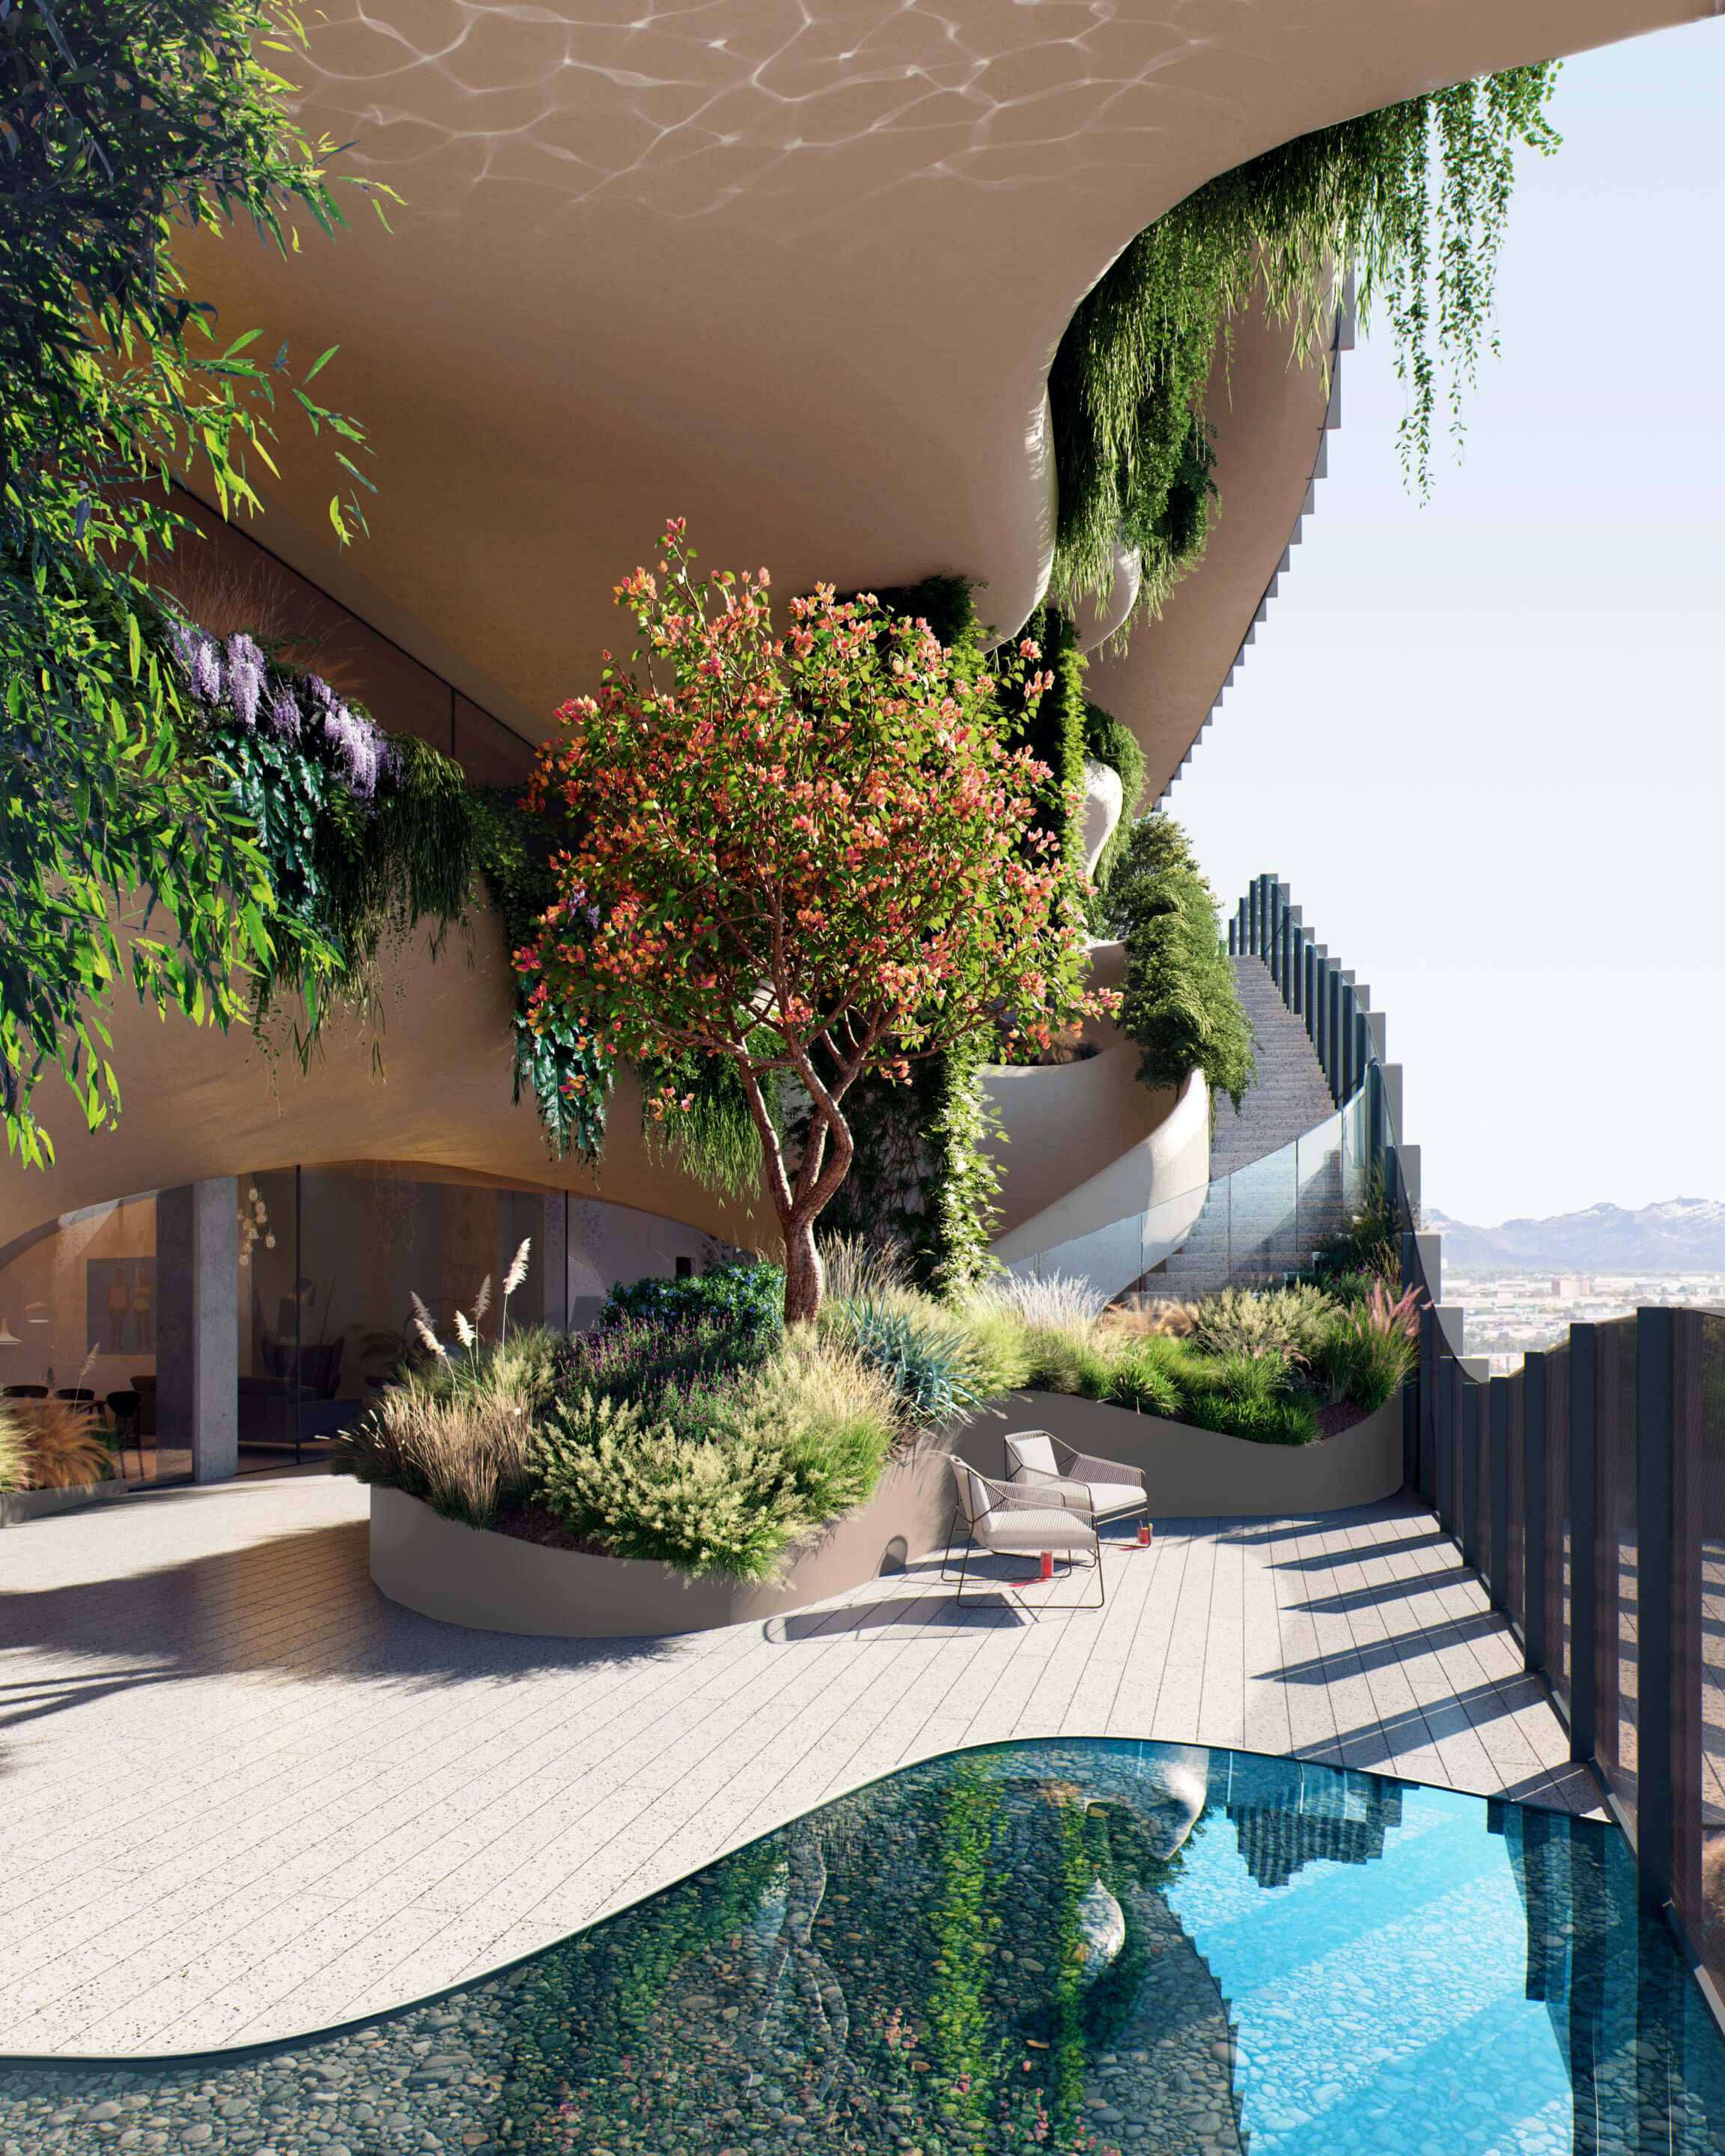 rendering of a curvaceous landscaped apartment terrace